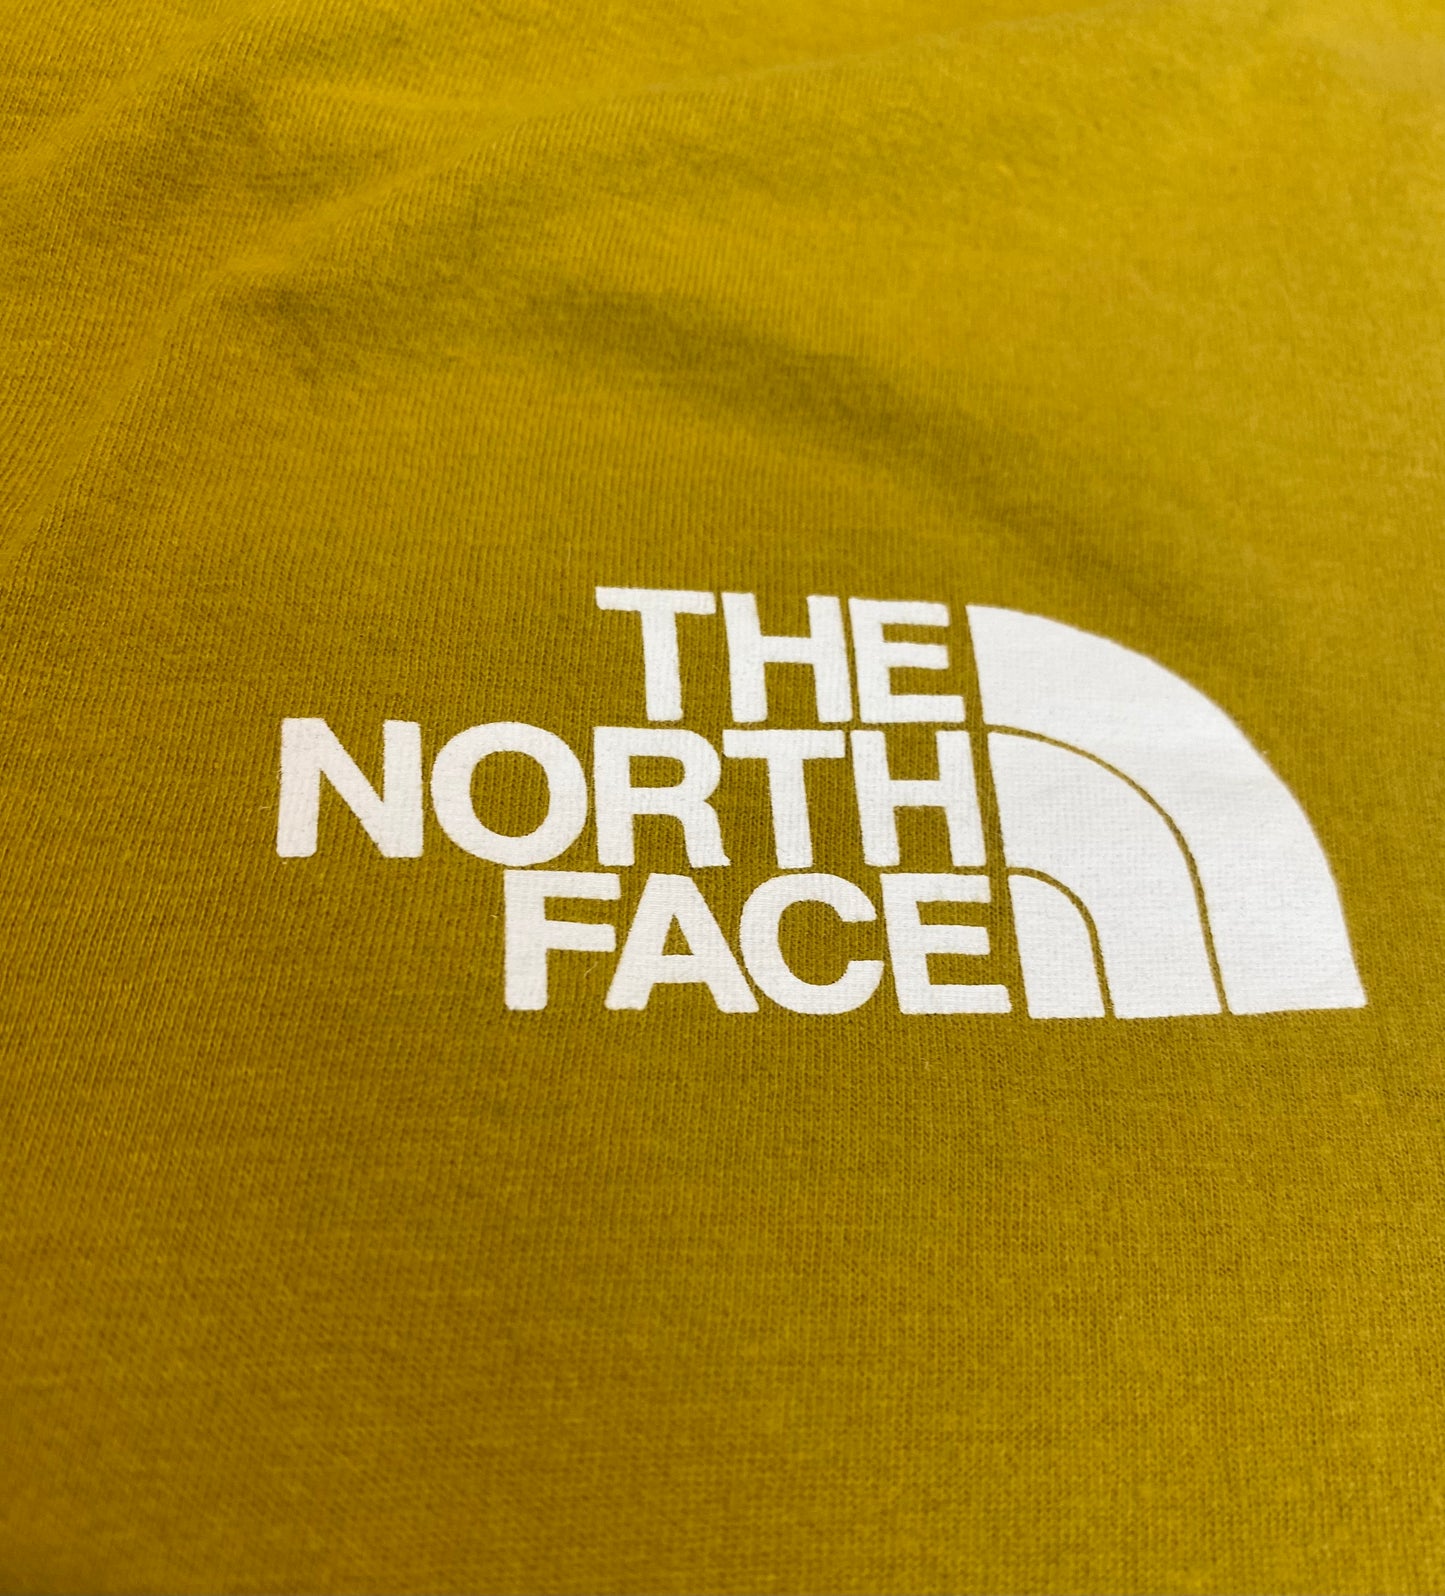 The North Face T-Shirt